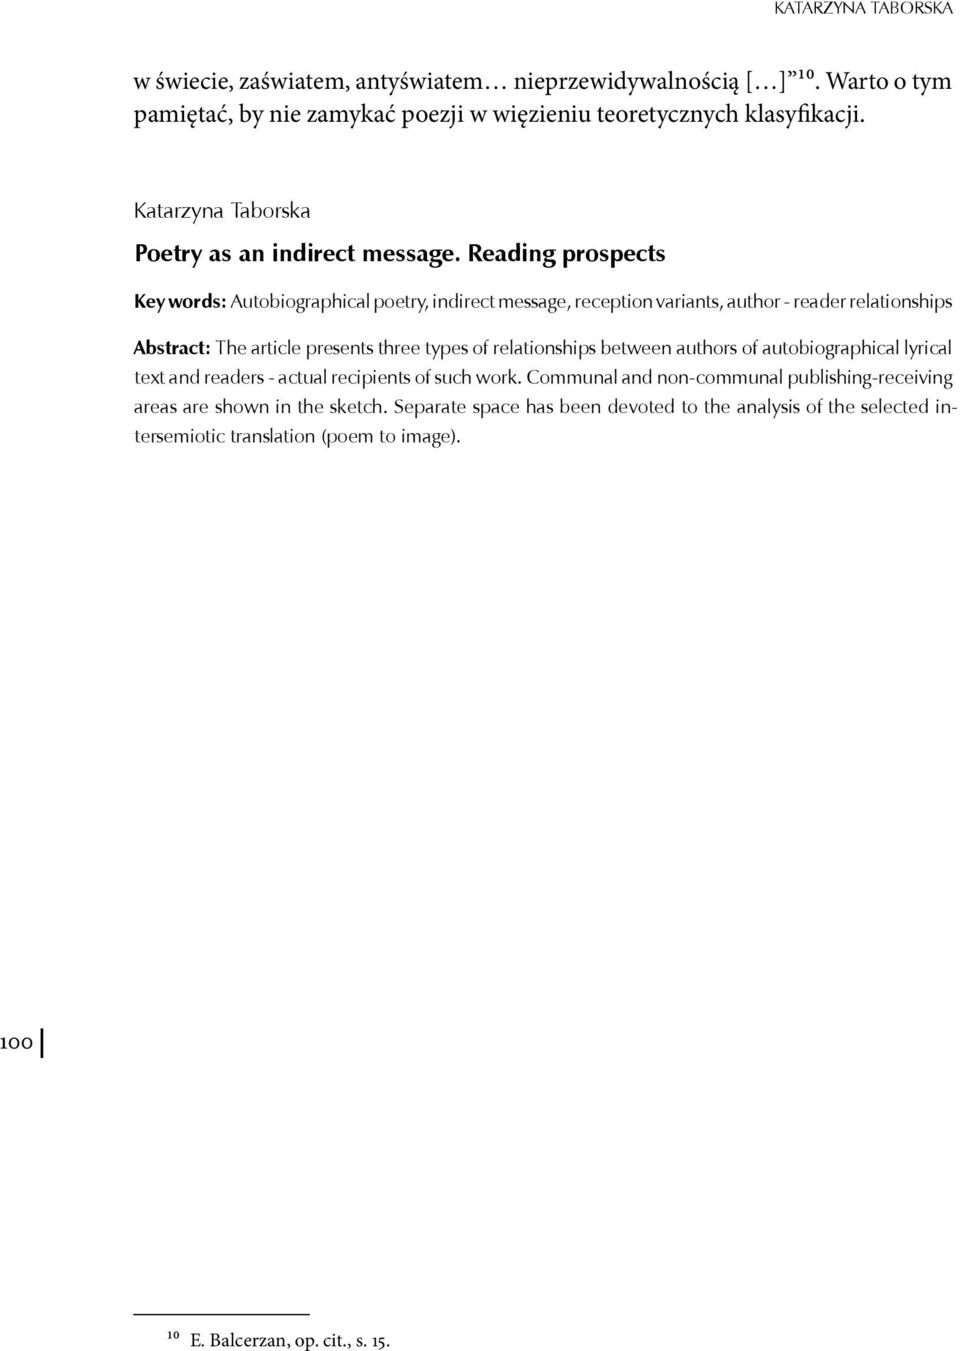 Reading prospects Key words: Autobiographical poetry, indirect message, reception variants, author - reader relationships Abstract: The article presents three types of